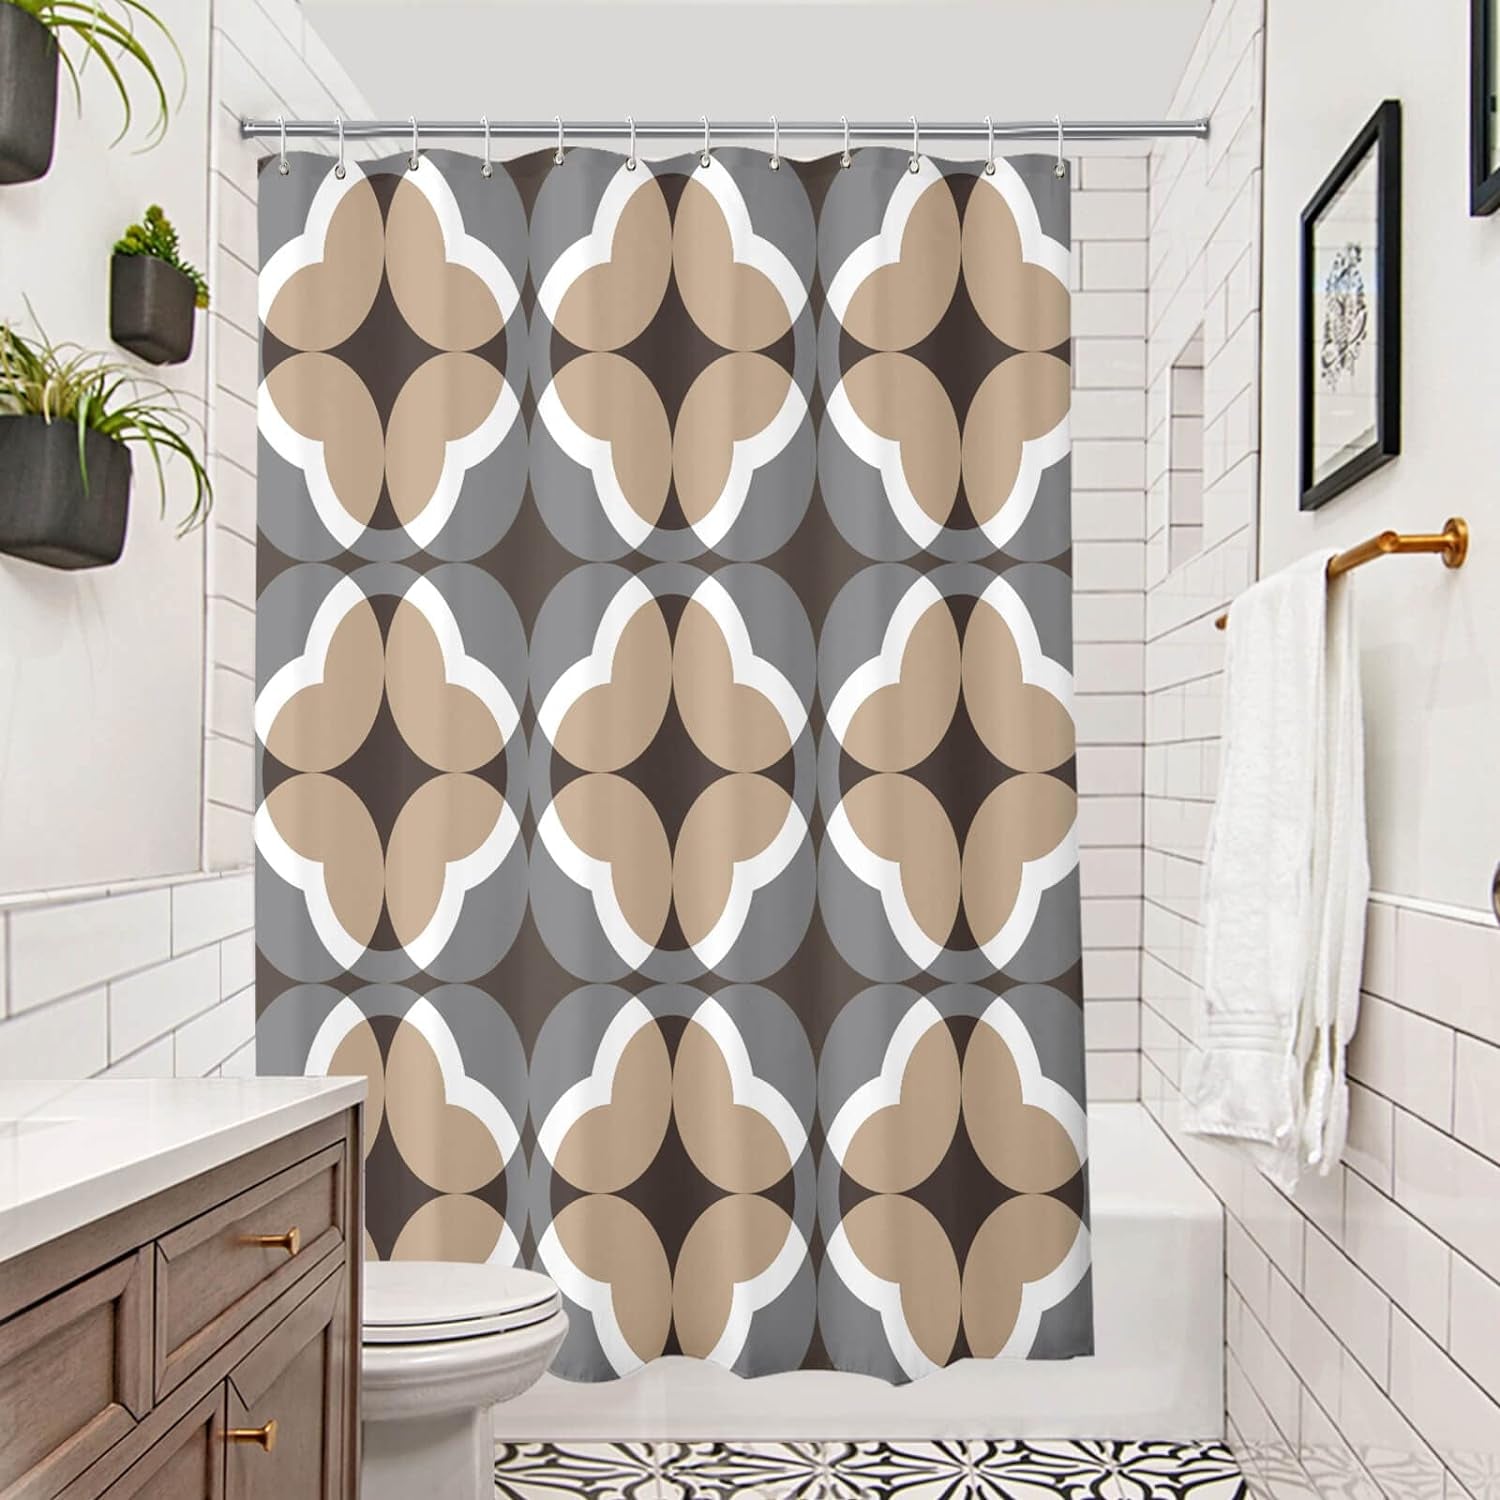 Brown Fabric Shower Curtains for Bathroom, Rustic Decorative Shower Curtain, Abstract Tan Grey White Beige Geometric Pattern Bath Curtains for Bathroom, Brown Design Bathroom Decor Set with Hooks